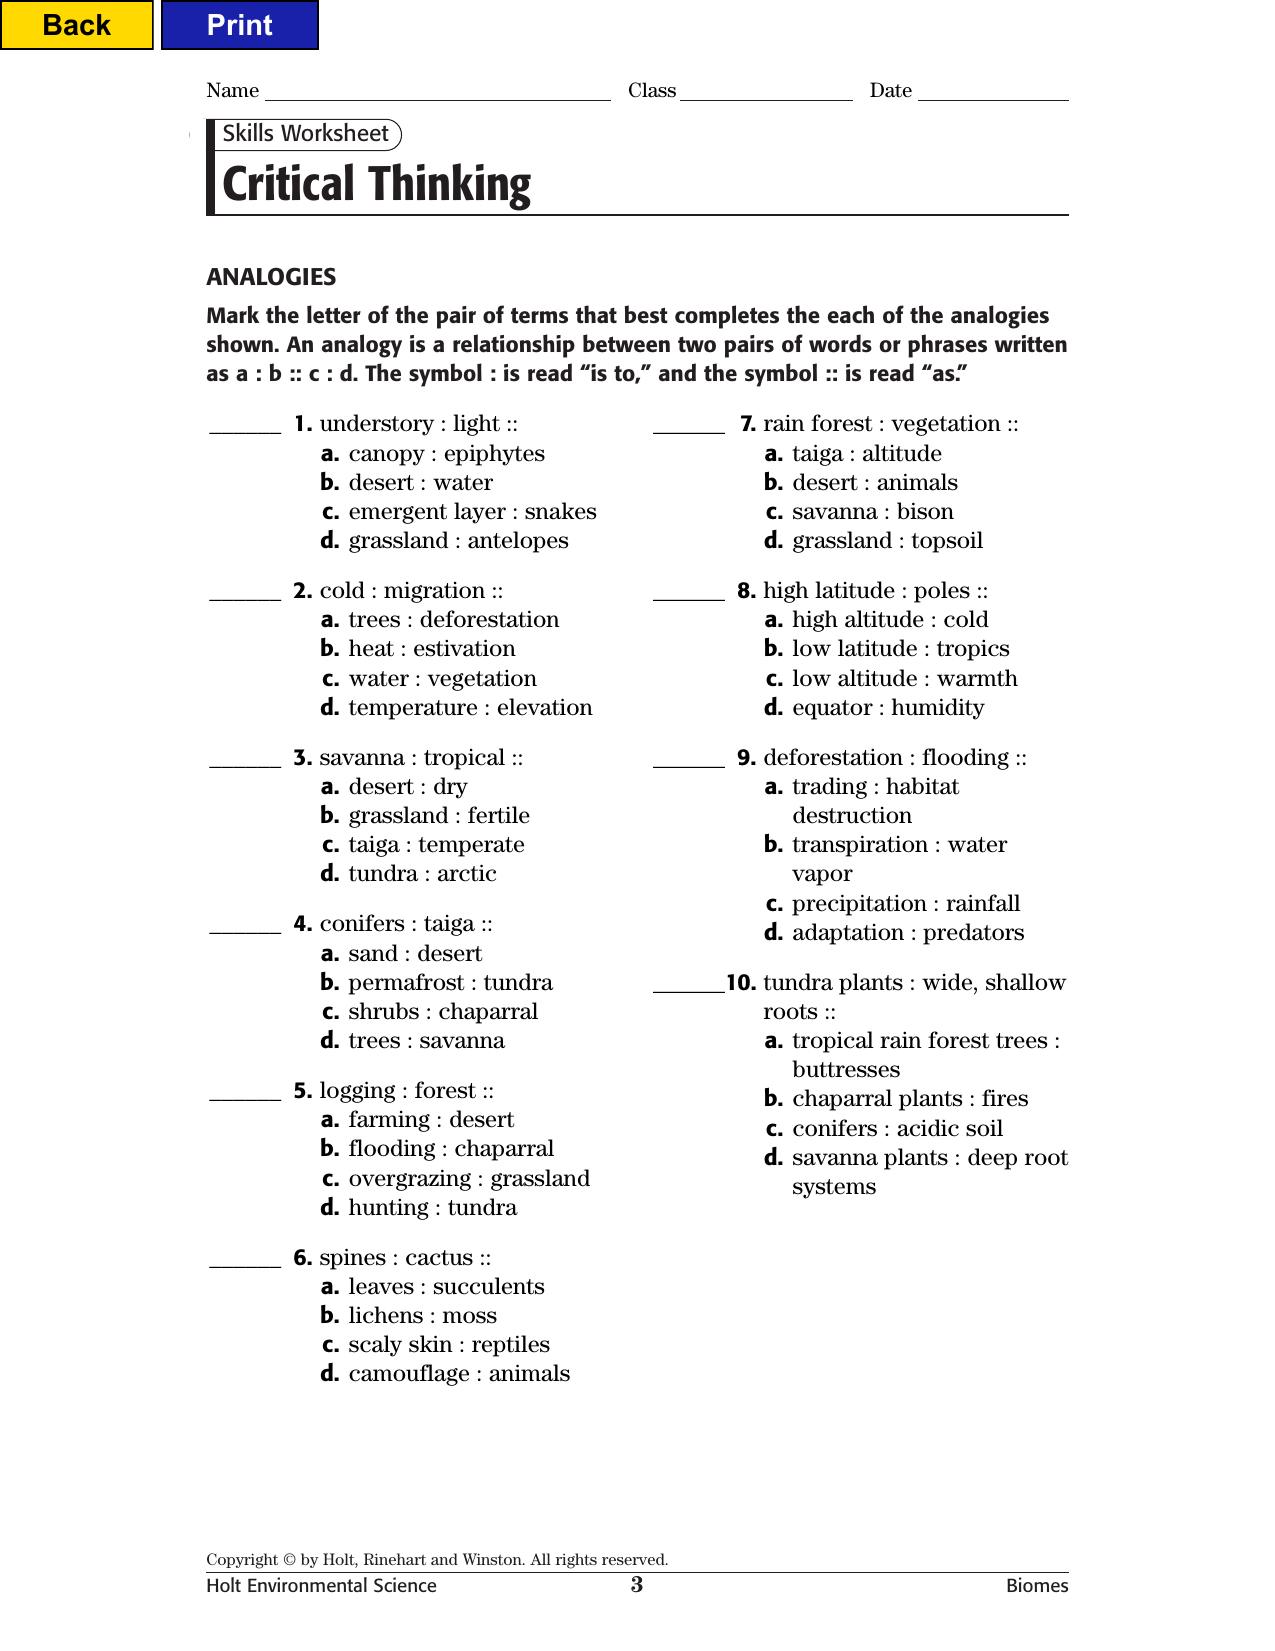 critical thinking skills worksheet environmental science answers chapter 3